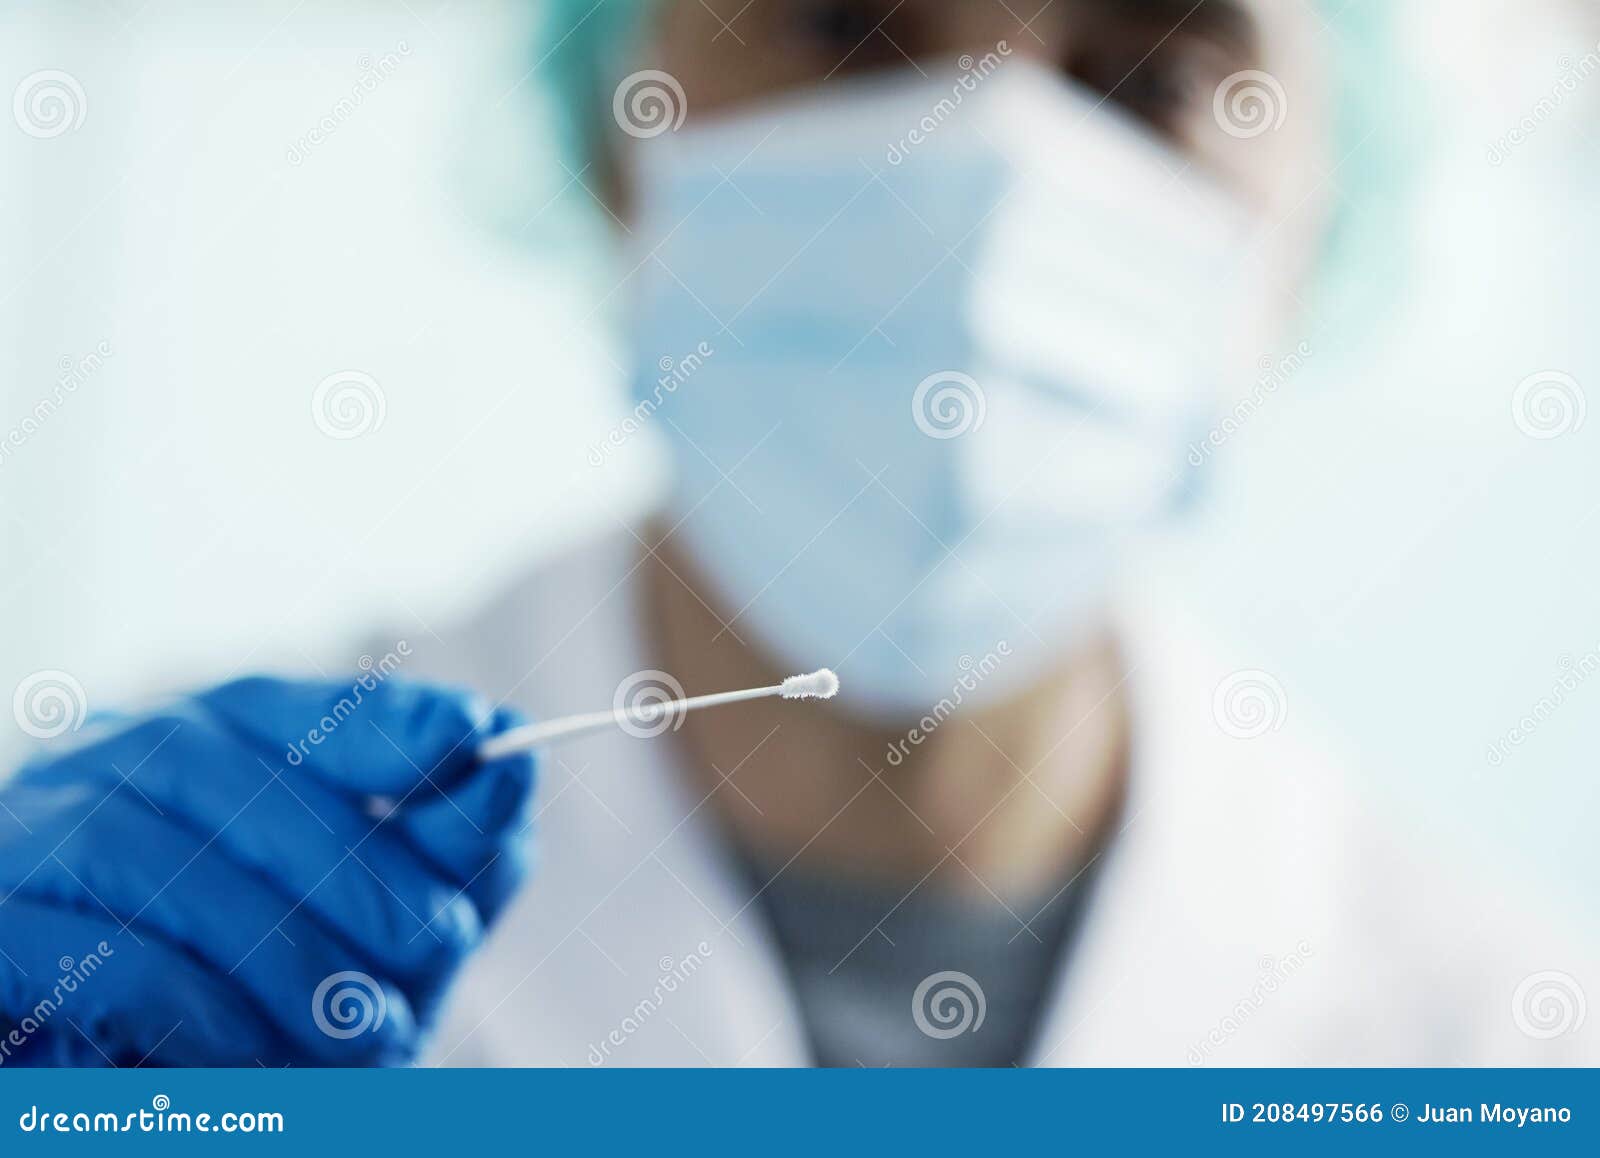 person about to take a nasopharyngeal culture